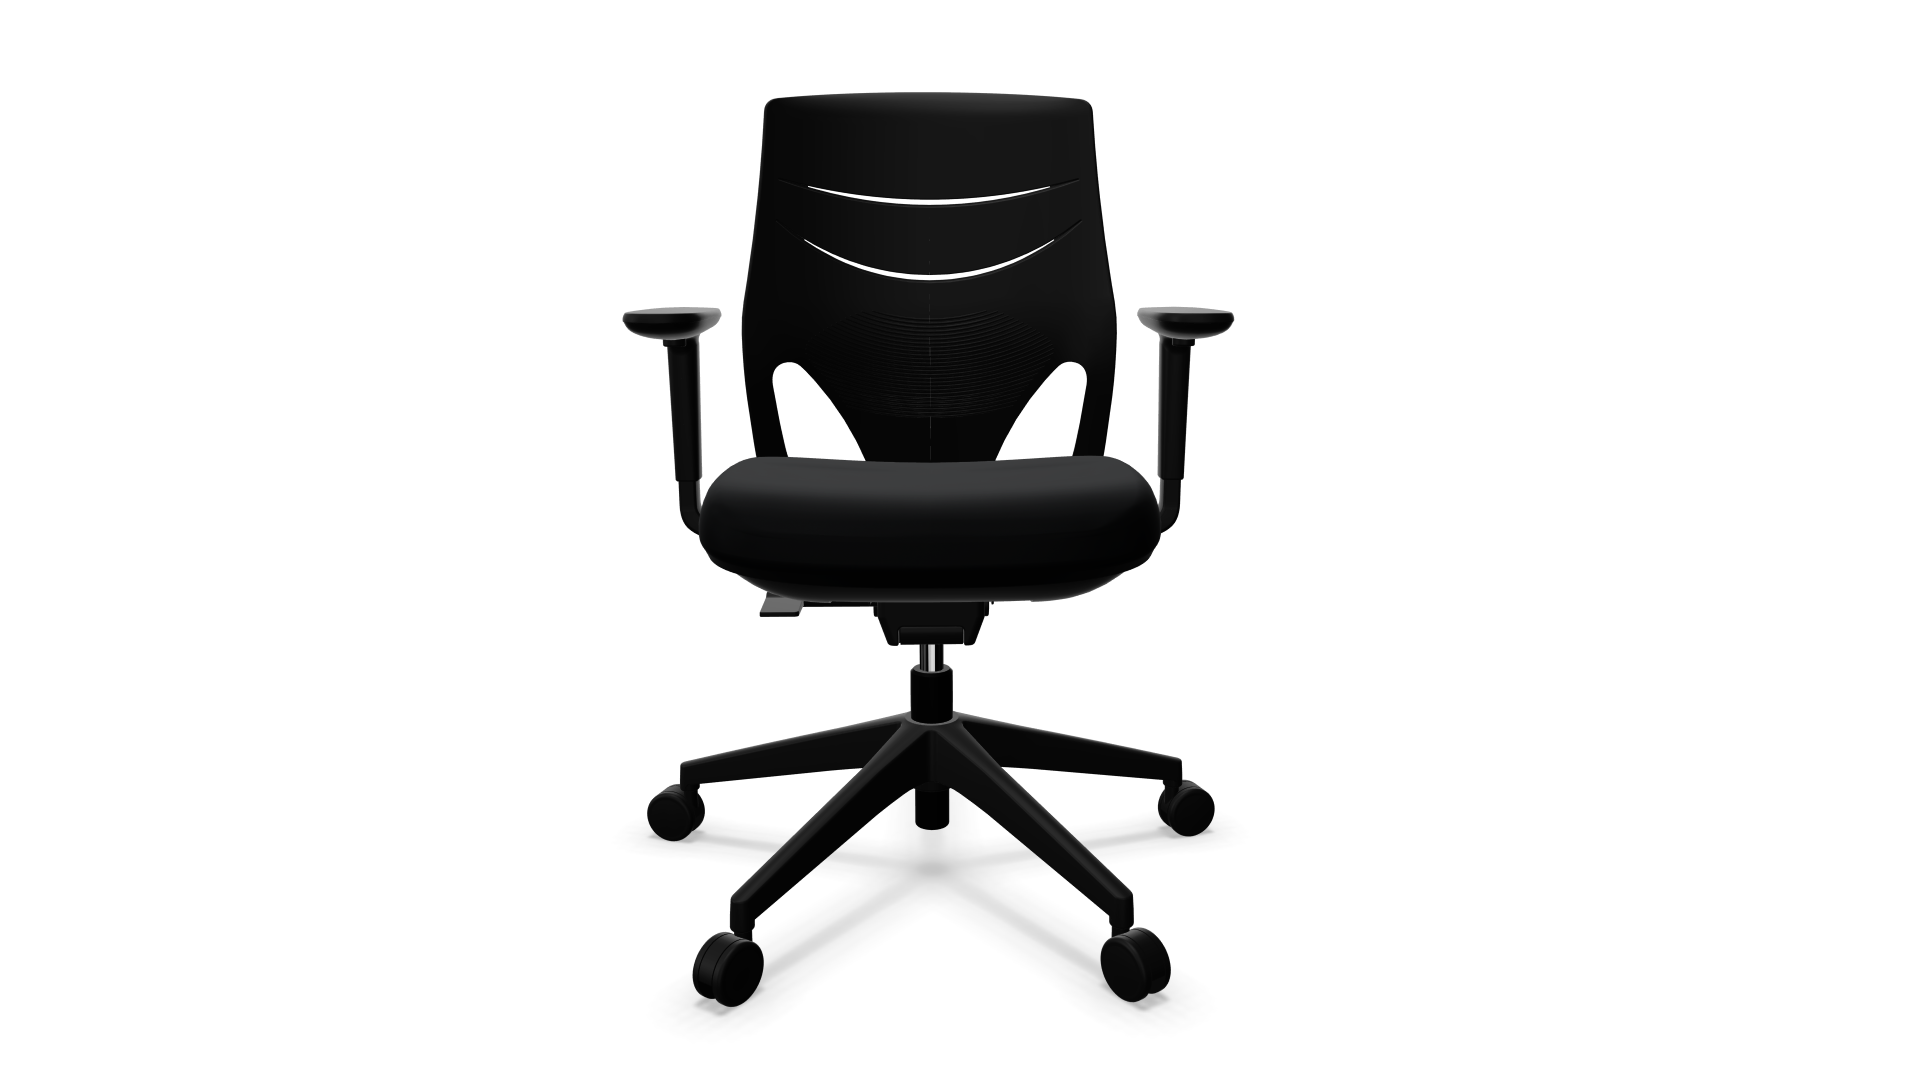 EFIT Office Chair with Black Back Home, Office, Garden online marketplace